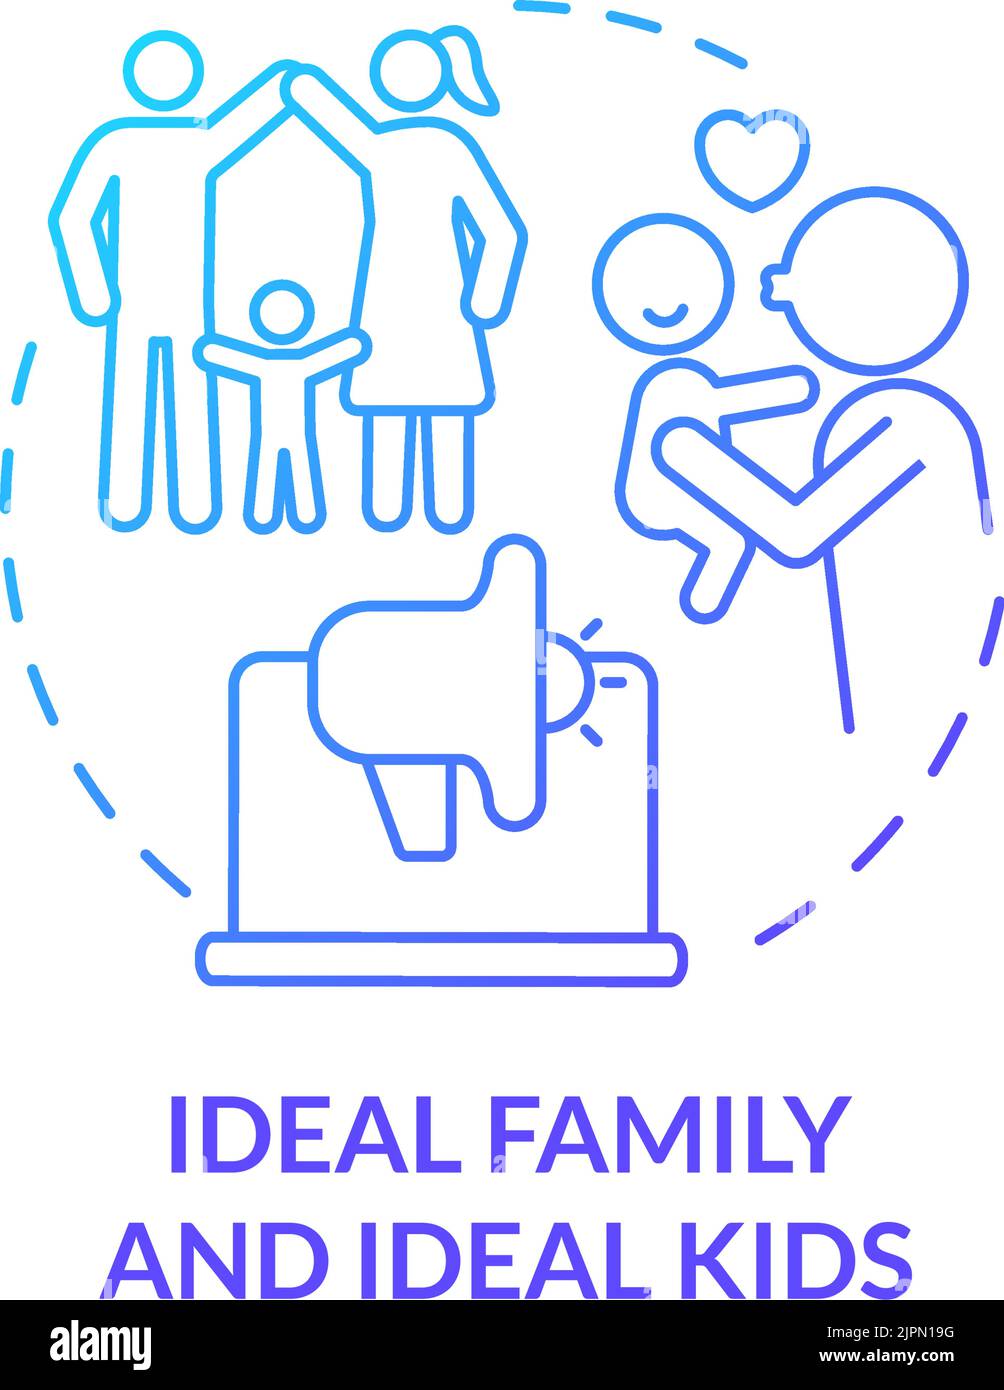 Ideal family and kids blue gradient concept icon Stock Vector